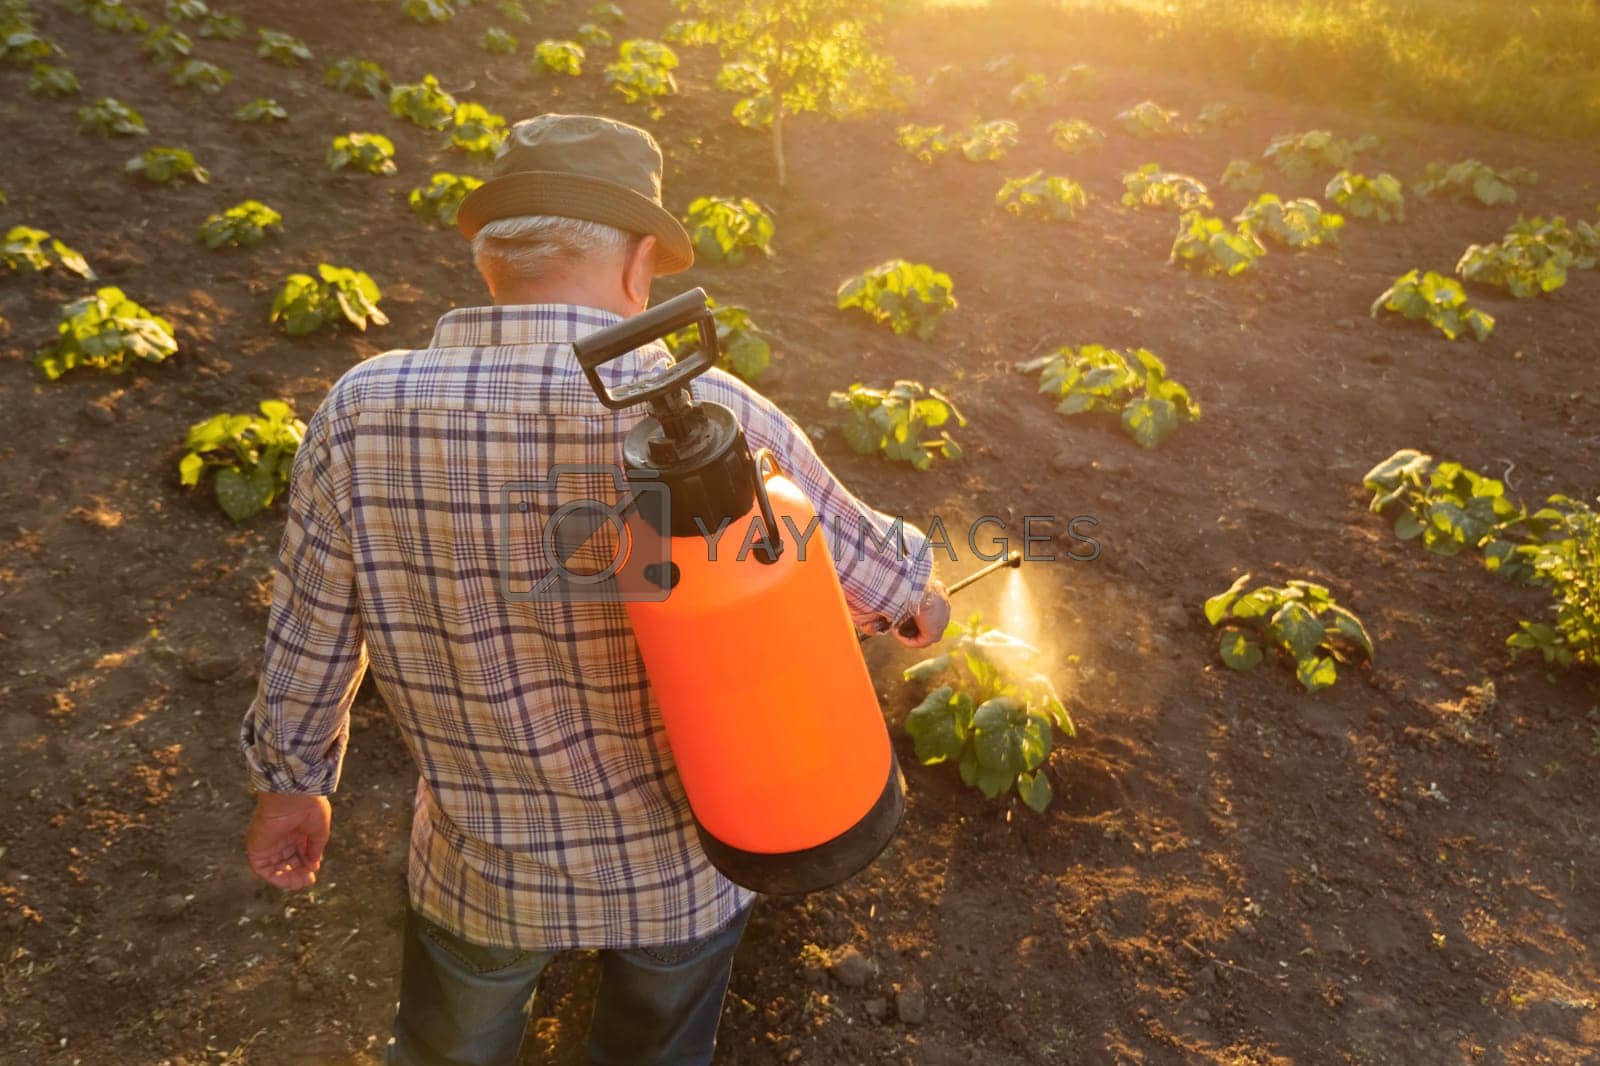 Royalty free image of Backpack sprayer gardener working farmer spraying insecticide. Old farmer farm spraying pesticide sprayer garden farm vegetable garden spraying crop protection plant. Knapsack sprayer farmer herbicide by synel